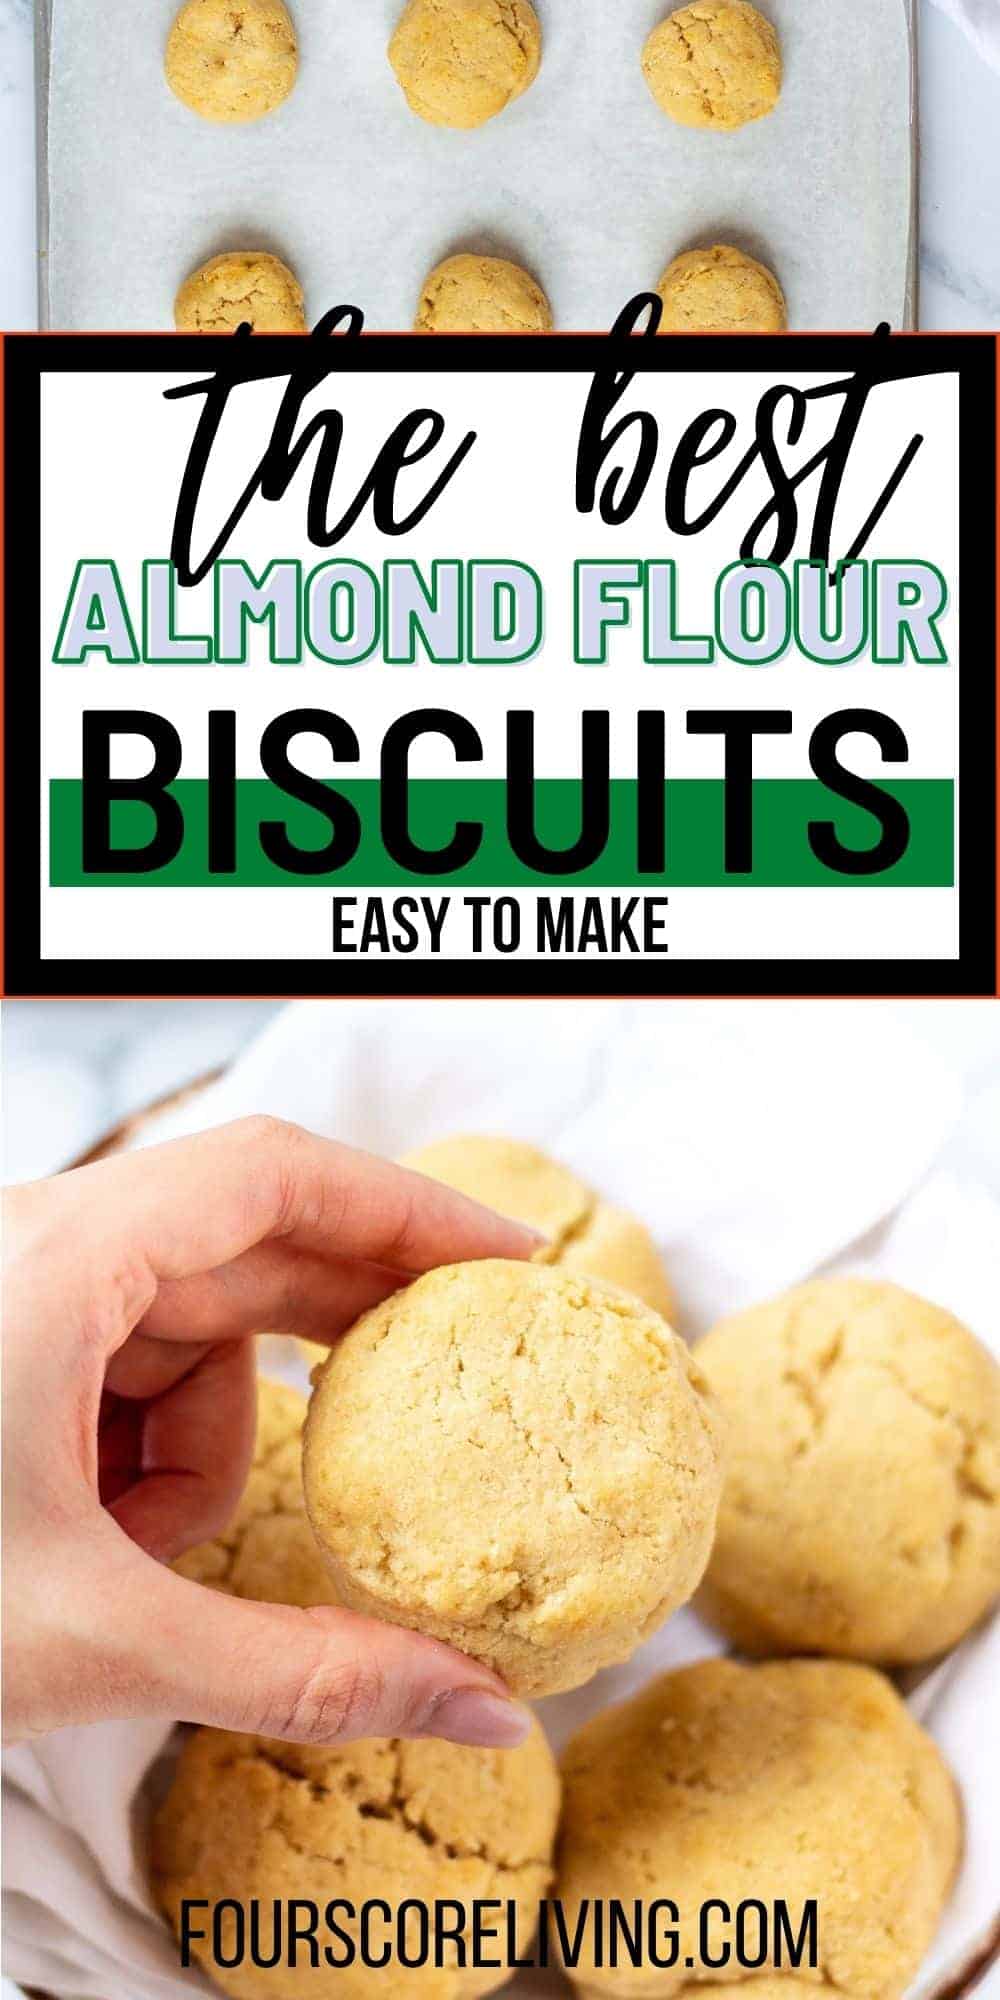 two photos of almond flour biscuits. Text over image says "the best almond flour biscuits easy to make" in different text styles.